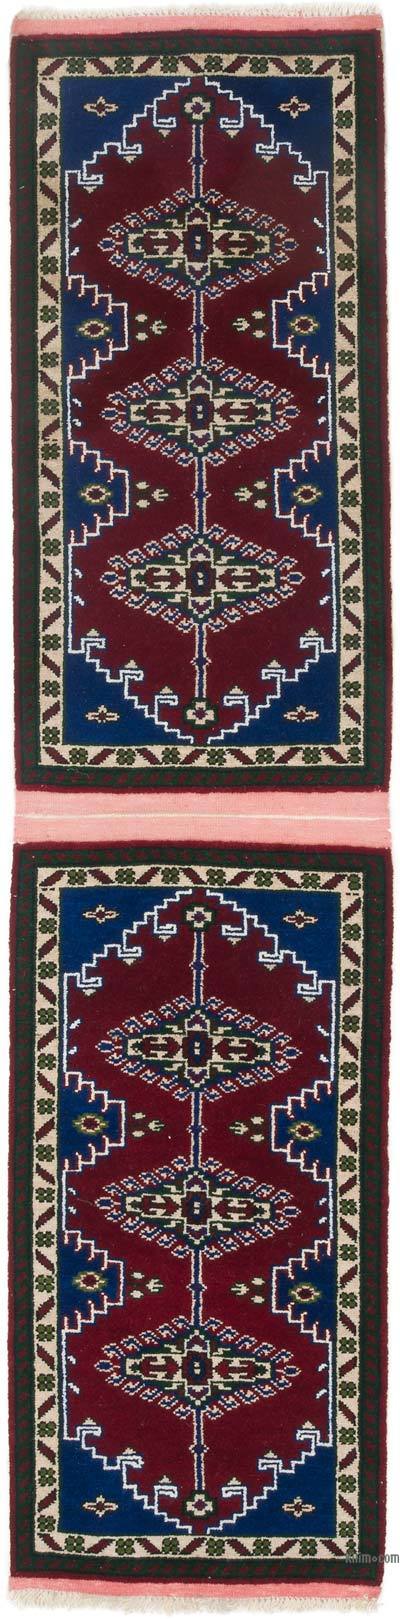 Vintage Turkish Hand-Knotted Runner - 1' 9" x 7' 3" (21 in. x 87 in.)